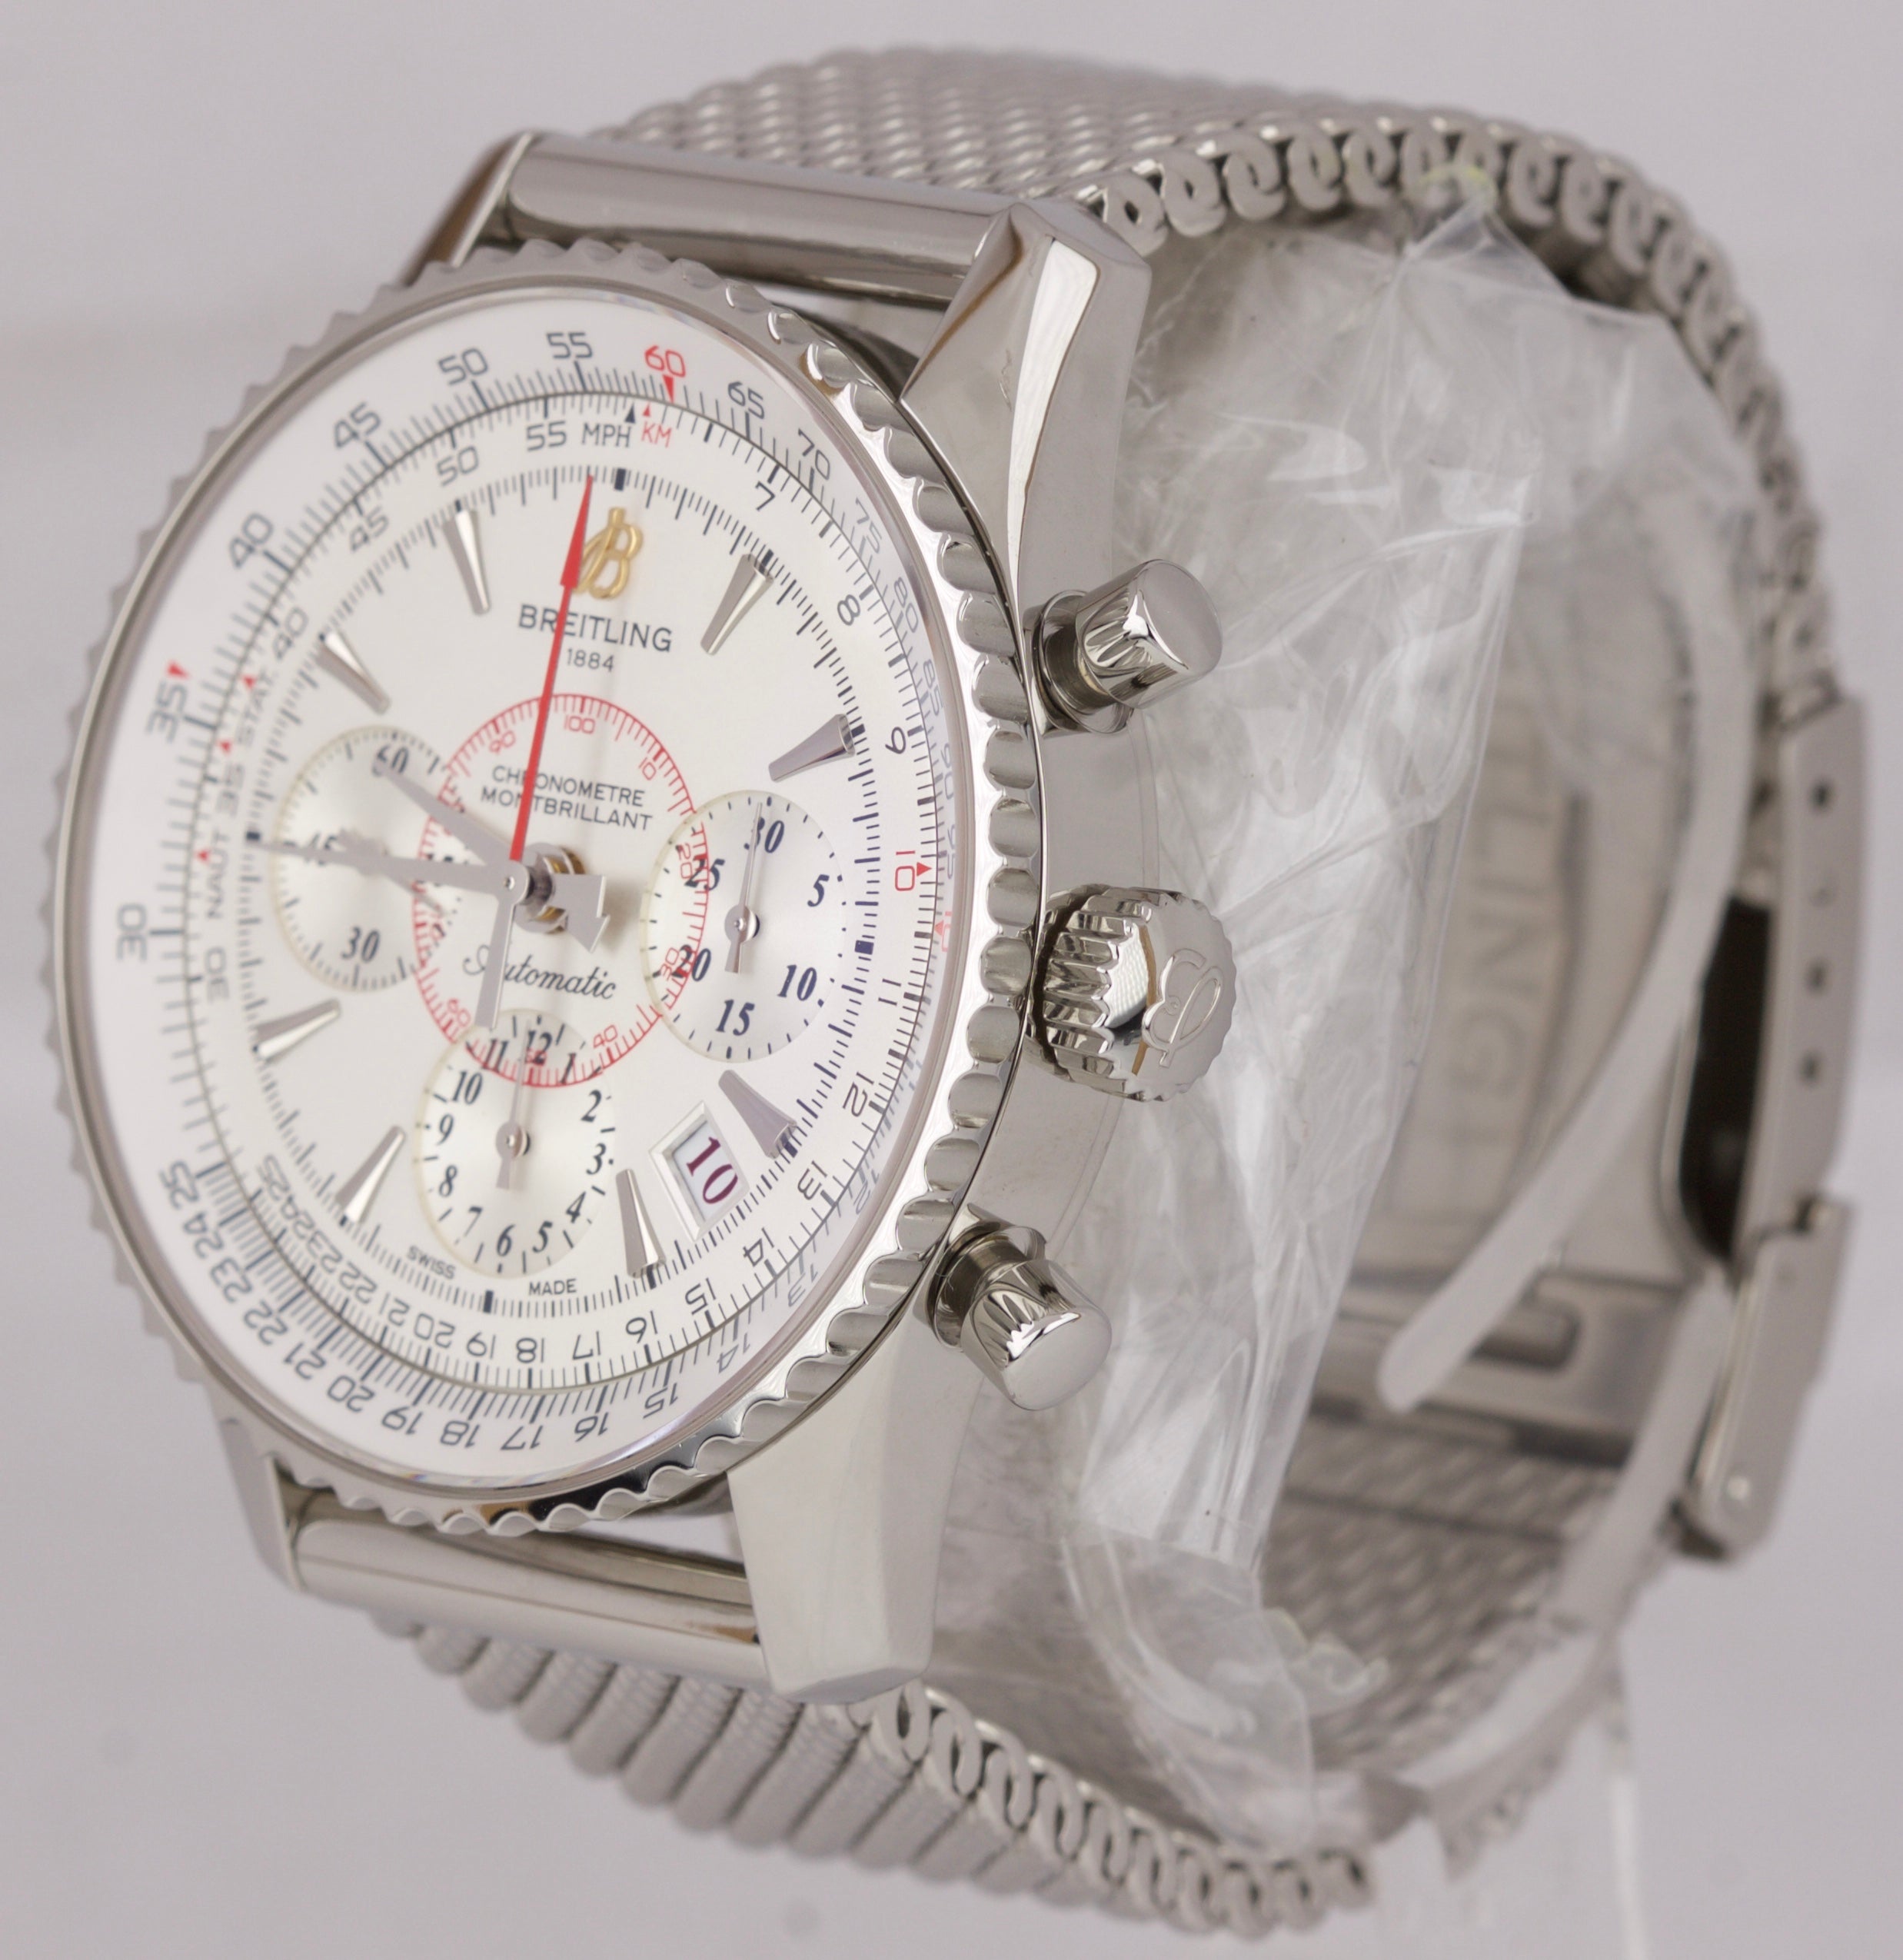 Breitling Montbrillant 01 Chronograph Automatic Steel White Date 40mm AB0131